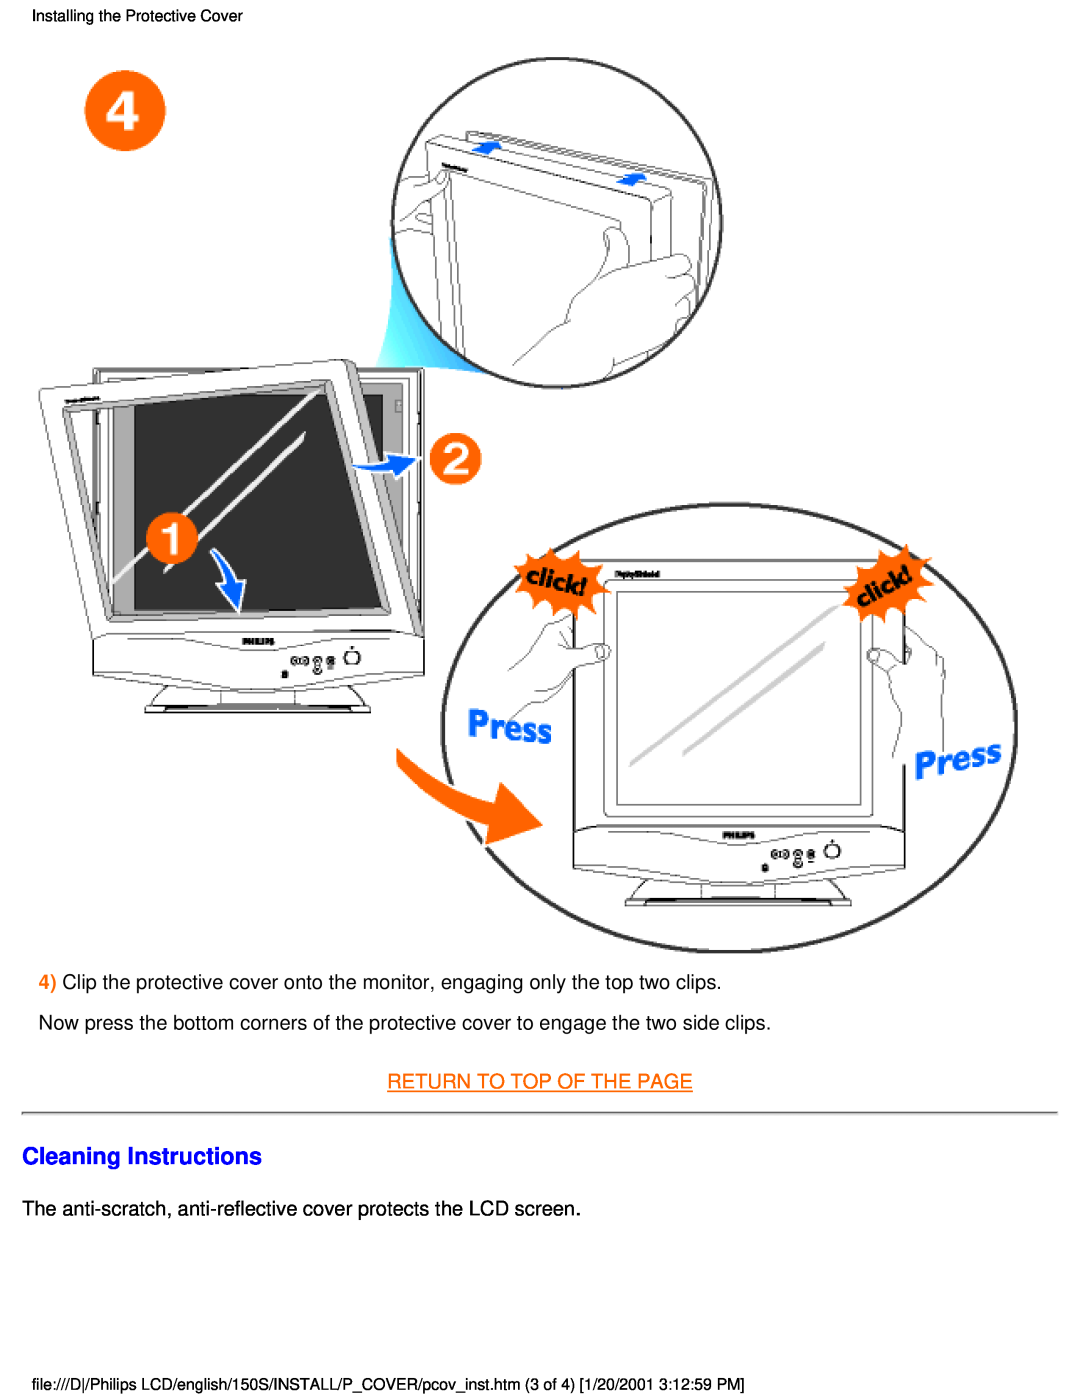 Philips 150S user manual Cleaning Instructions, Return To Top Of The Page, Installing the Protective Cover 